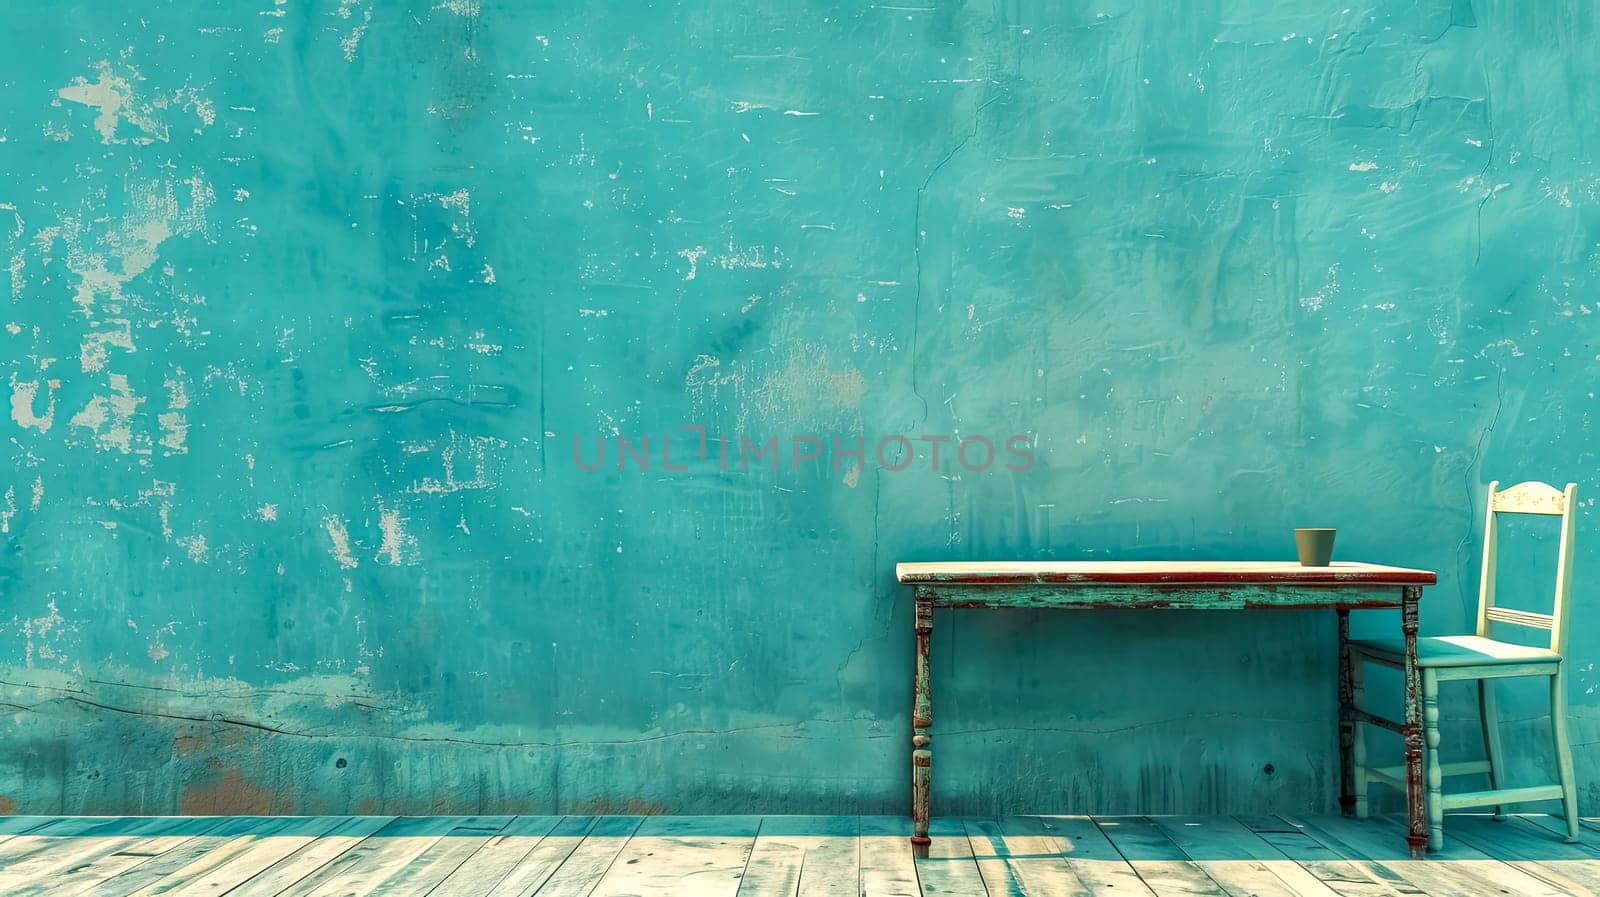 Rustic Workspace with Vintage Desk and Chair Against Turquoise Wall by Edophoto